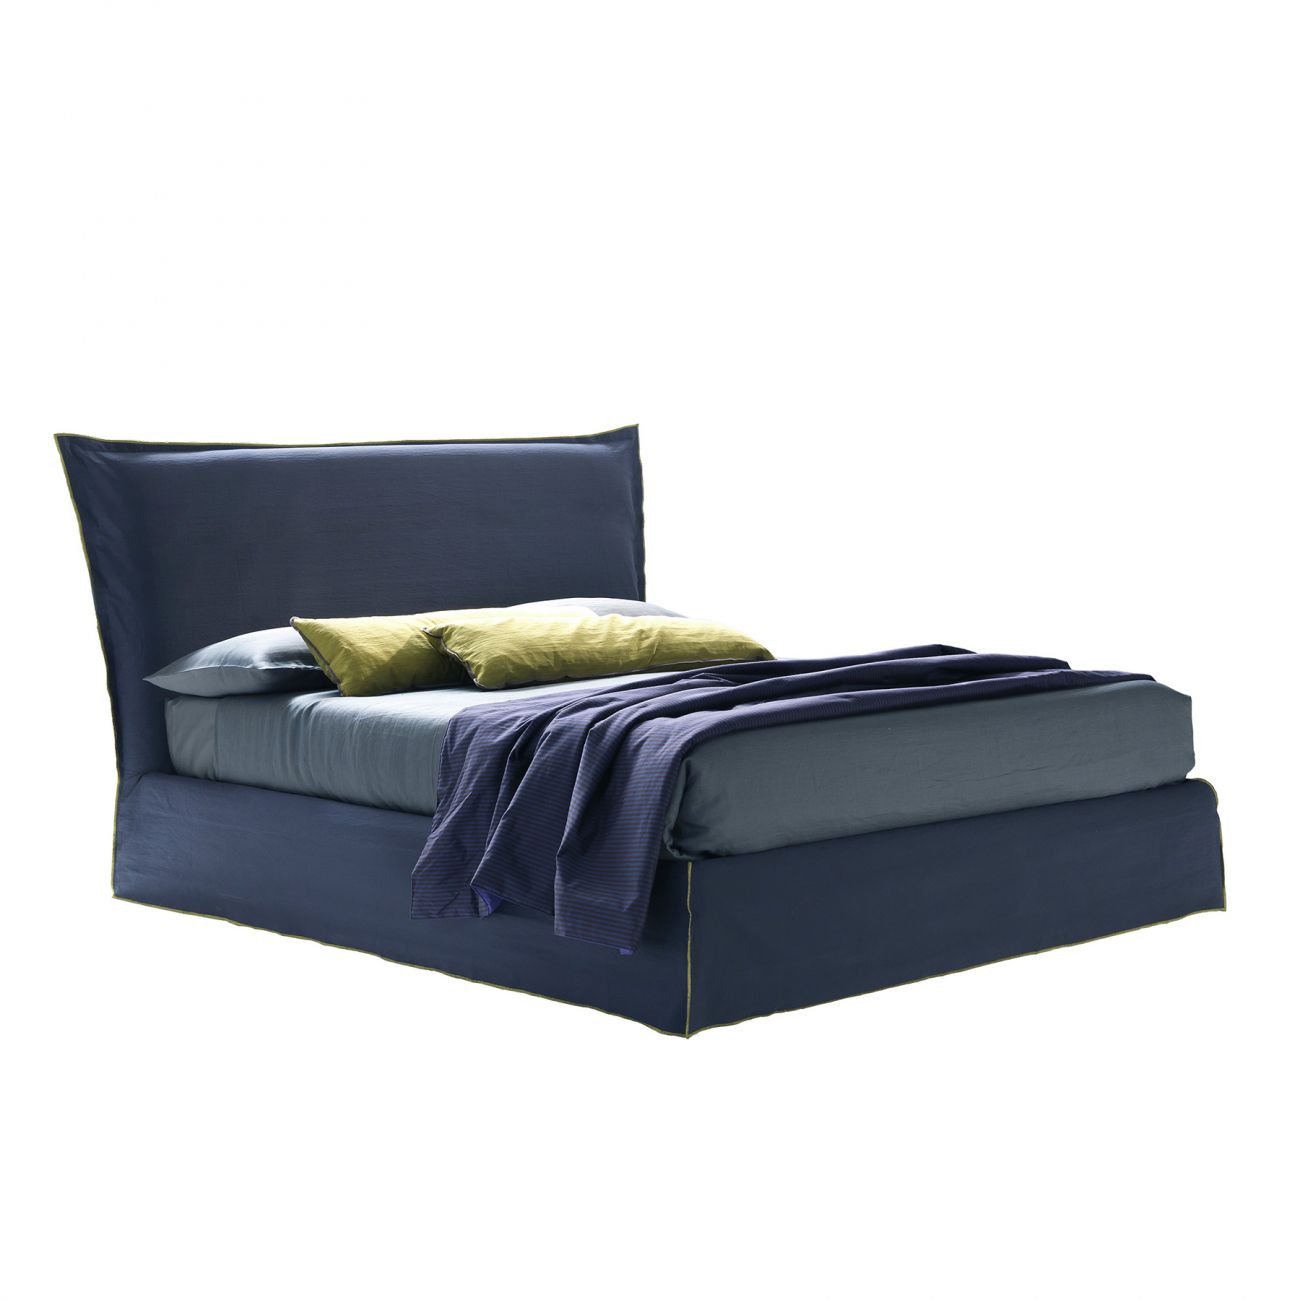 Single bed with upholstered headboard 90x200 cm blue Pretty Big Chic